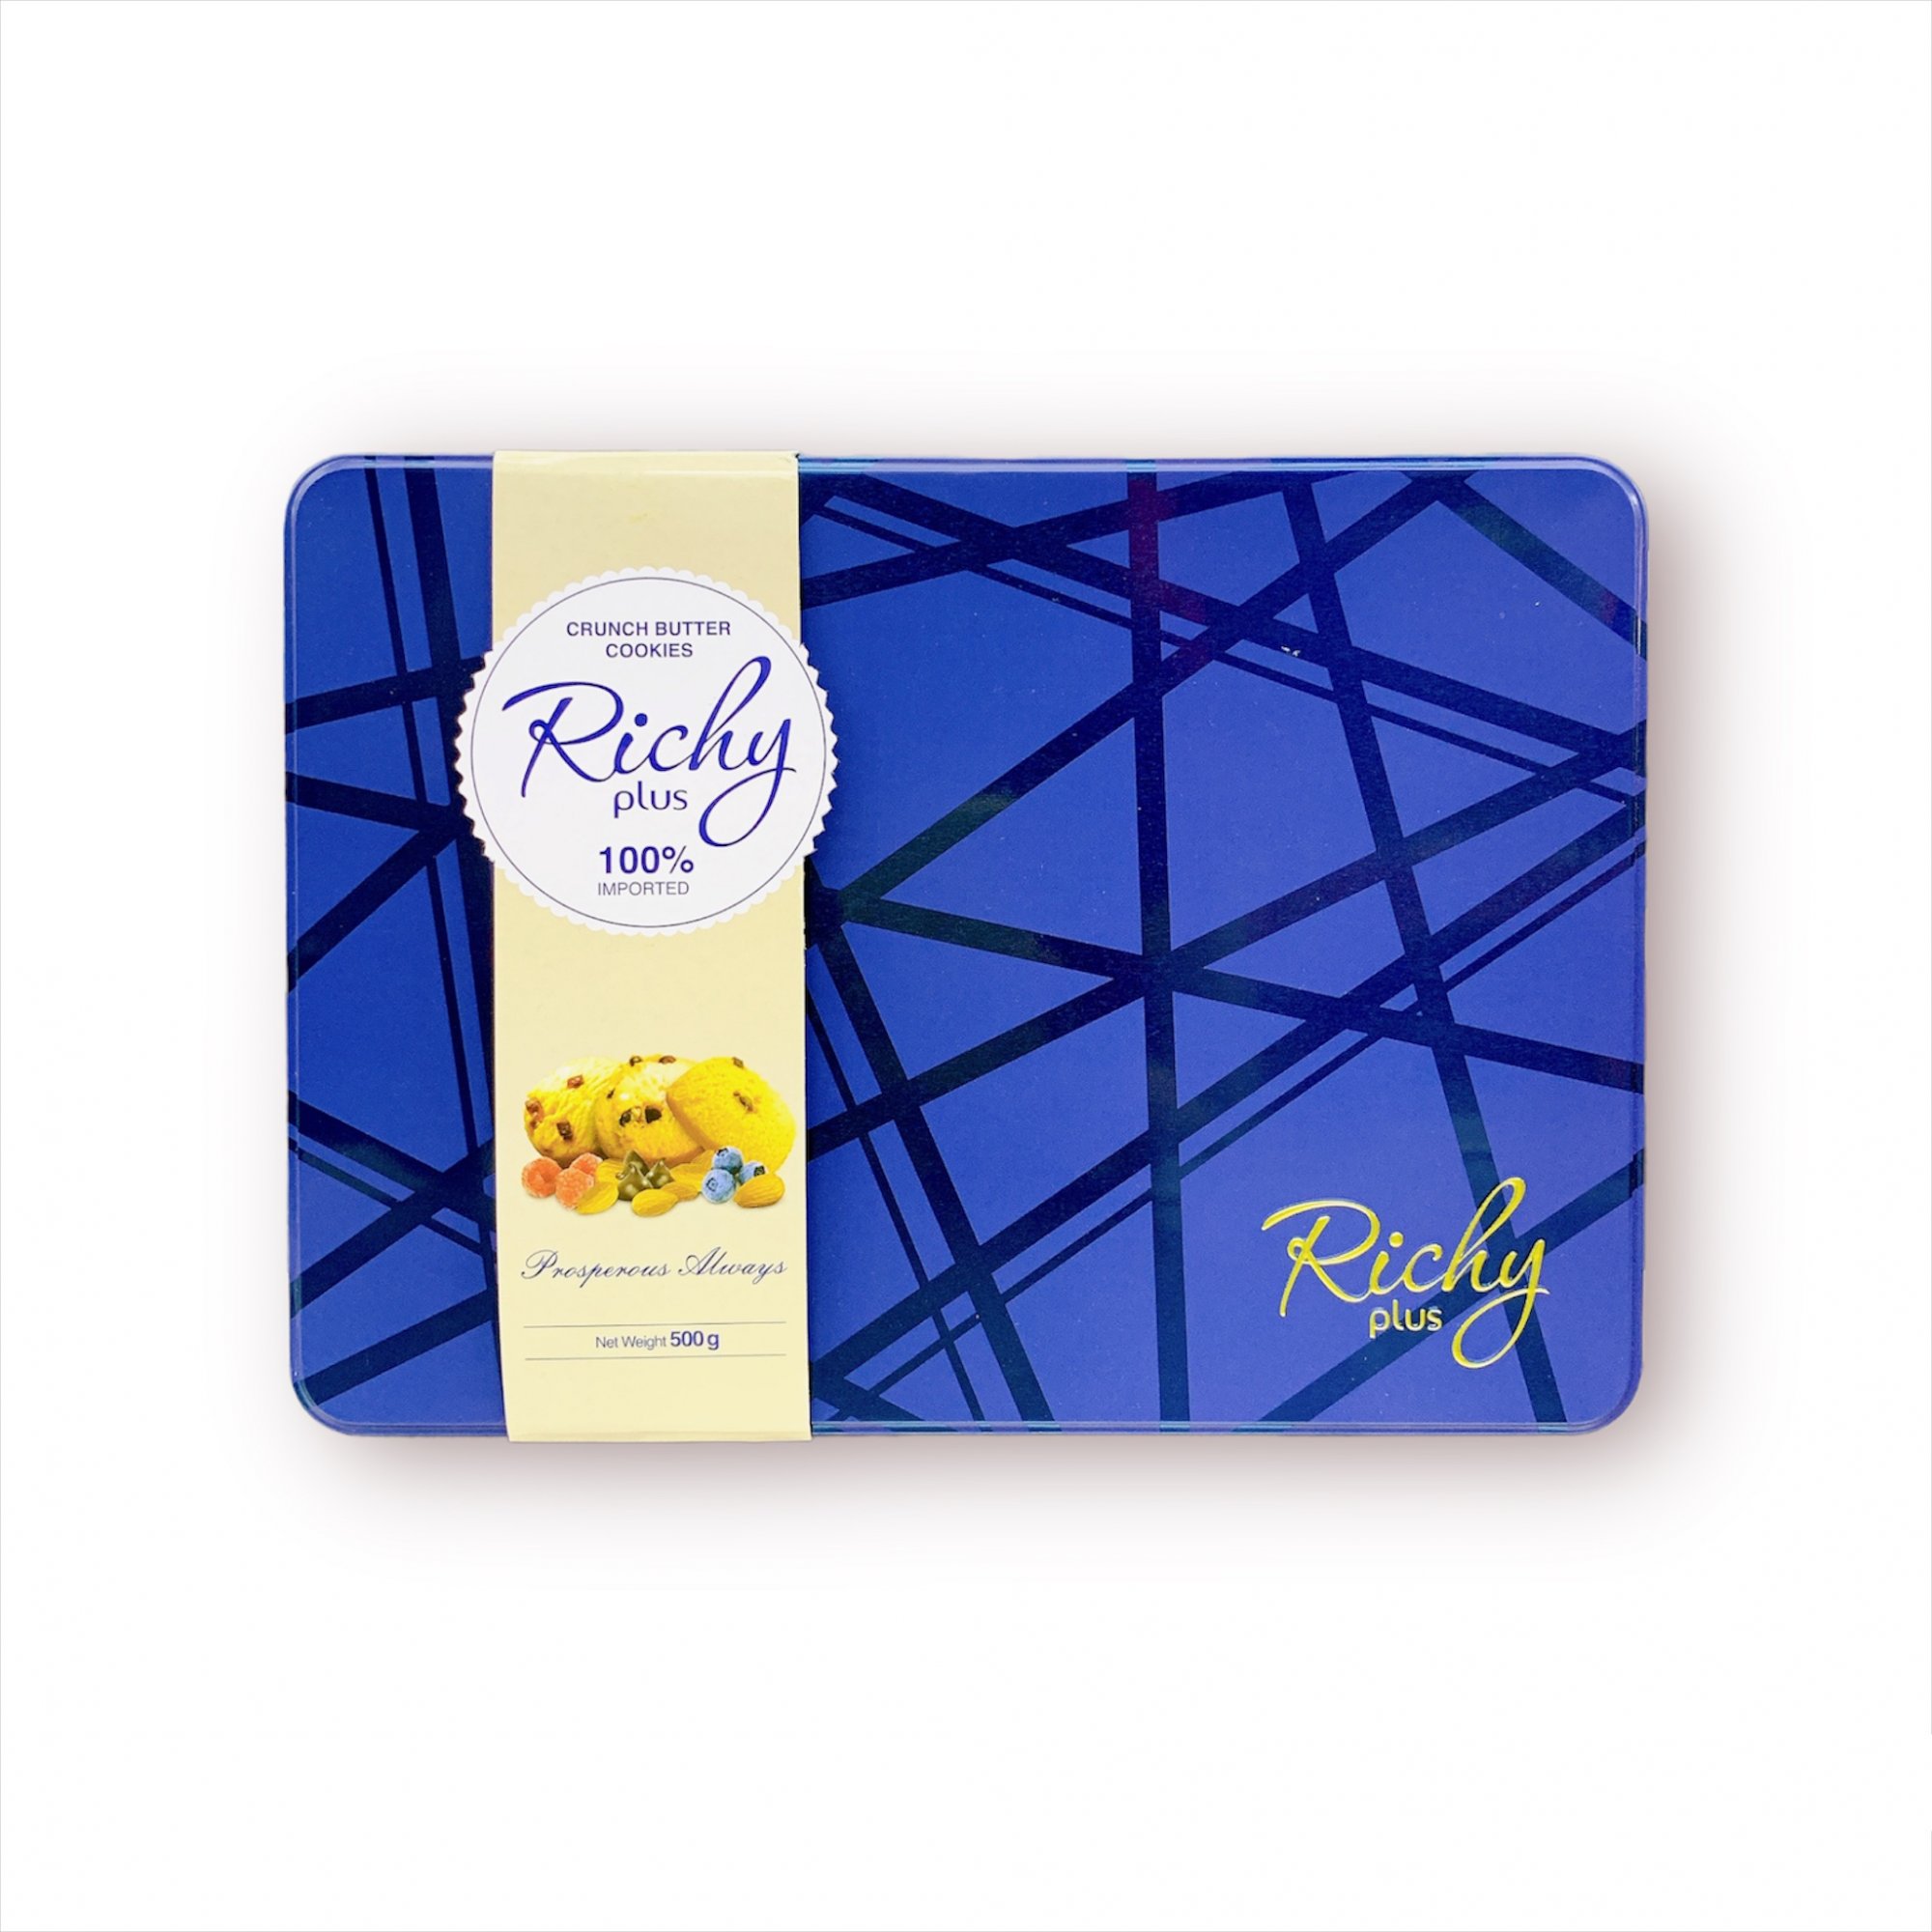 Bánh Quy Hộp Thiết Richy Plus 100% Imported - Xanh 500g